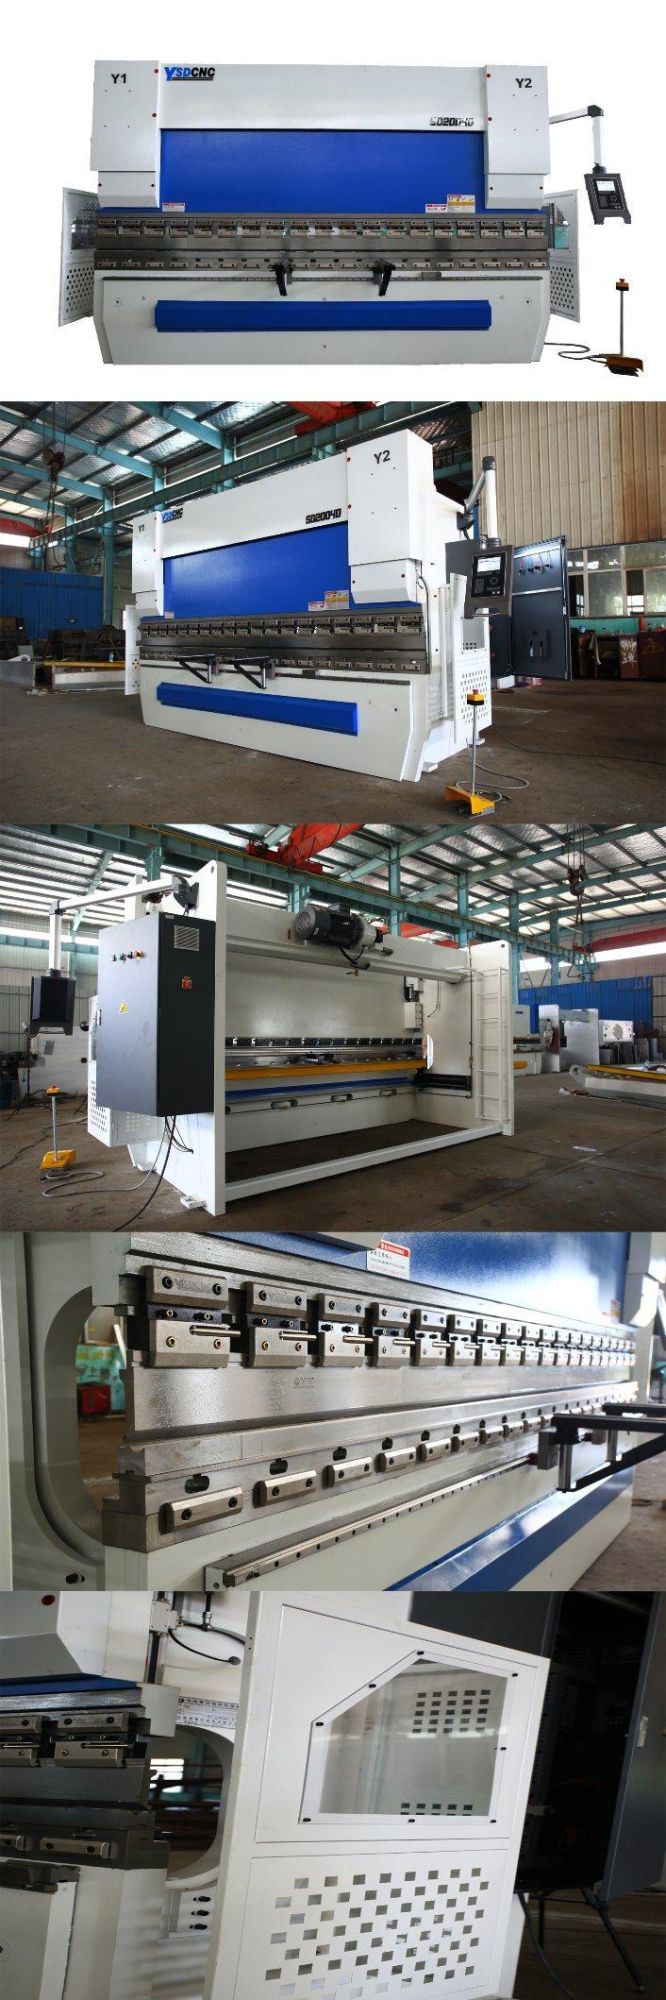 MB8 Hot Sale Metal Bending Machine with Da56s System 4+1 Axis